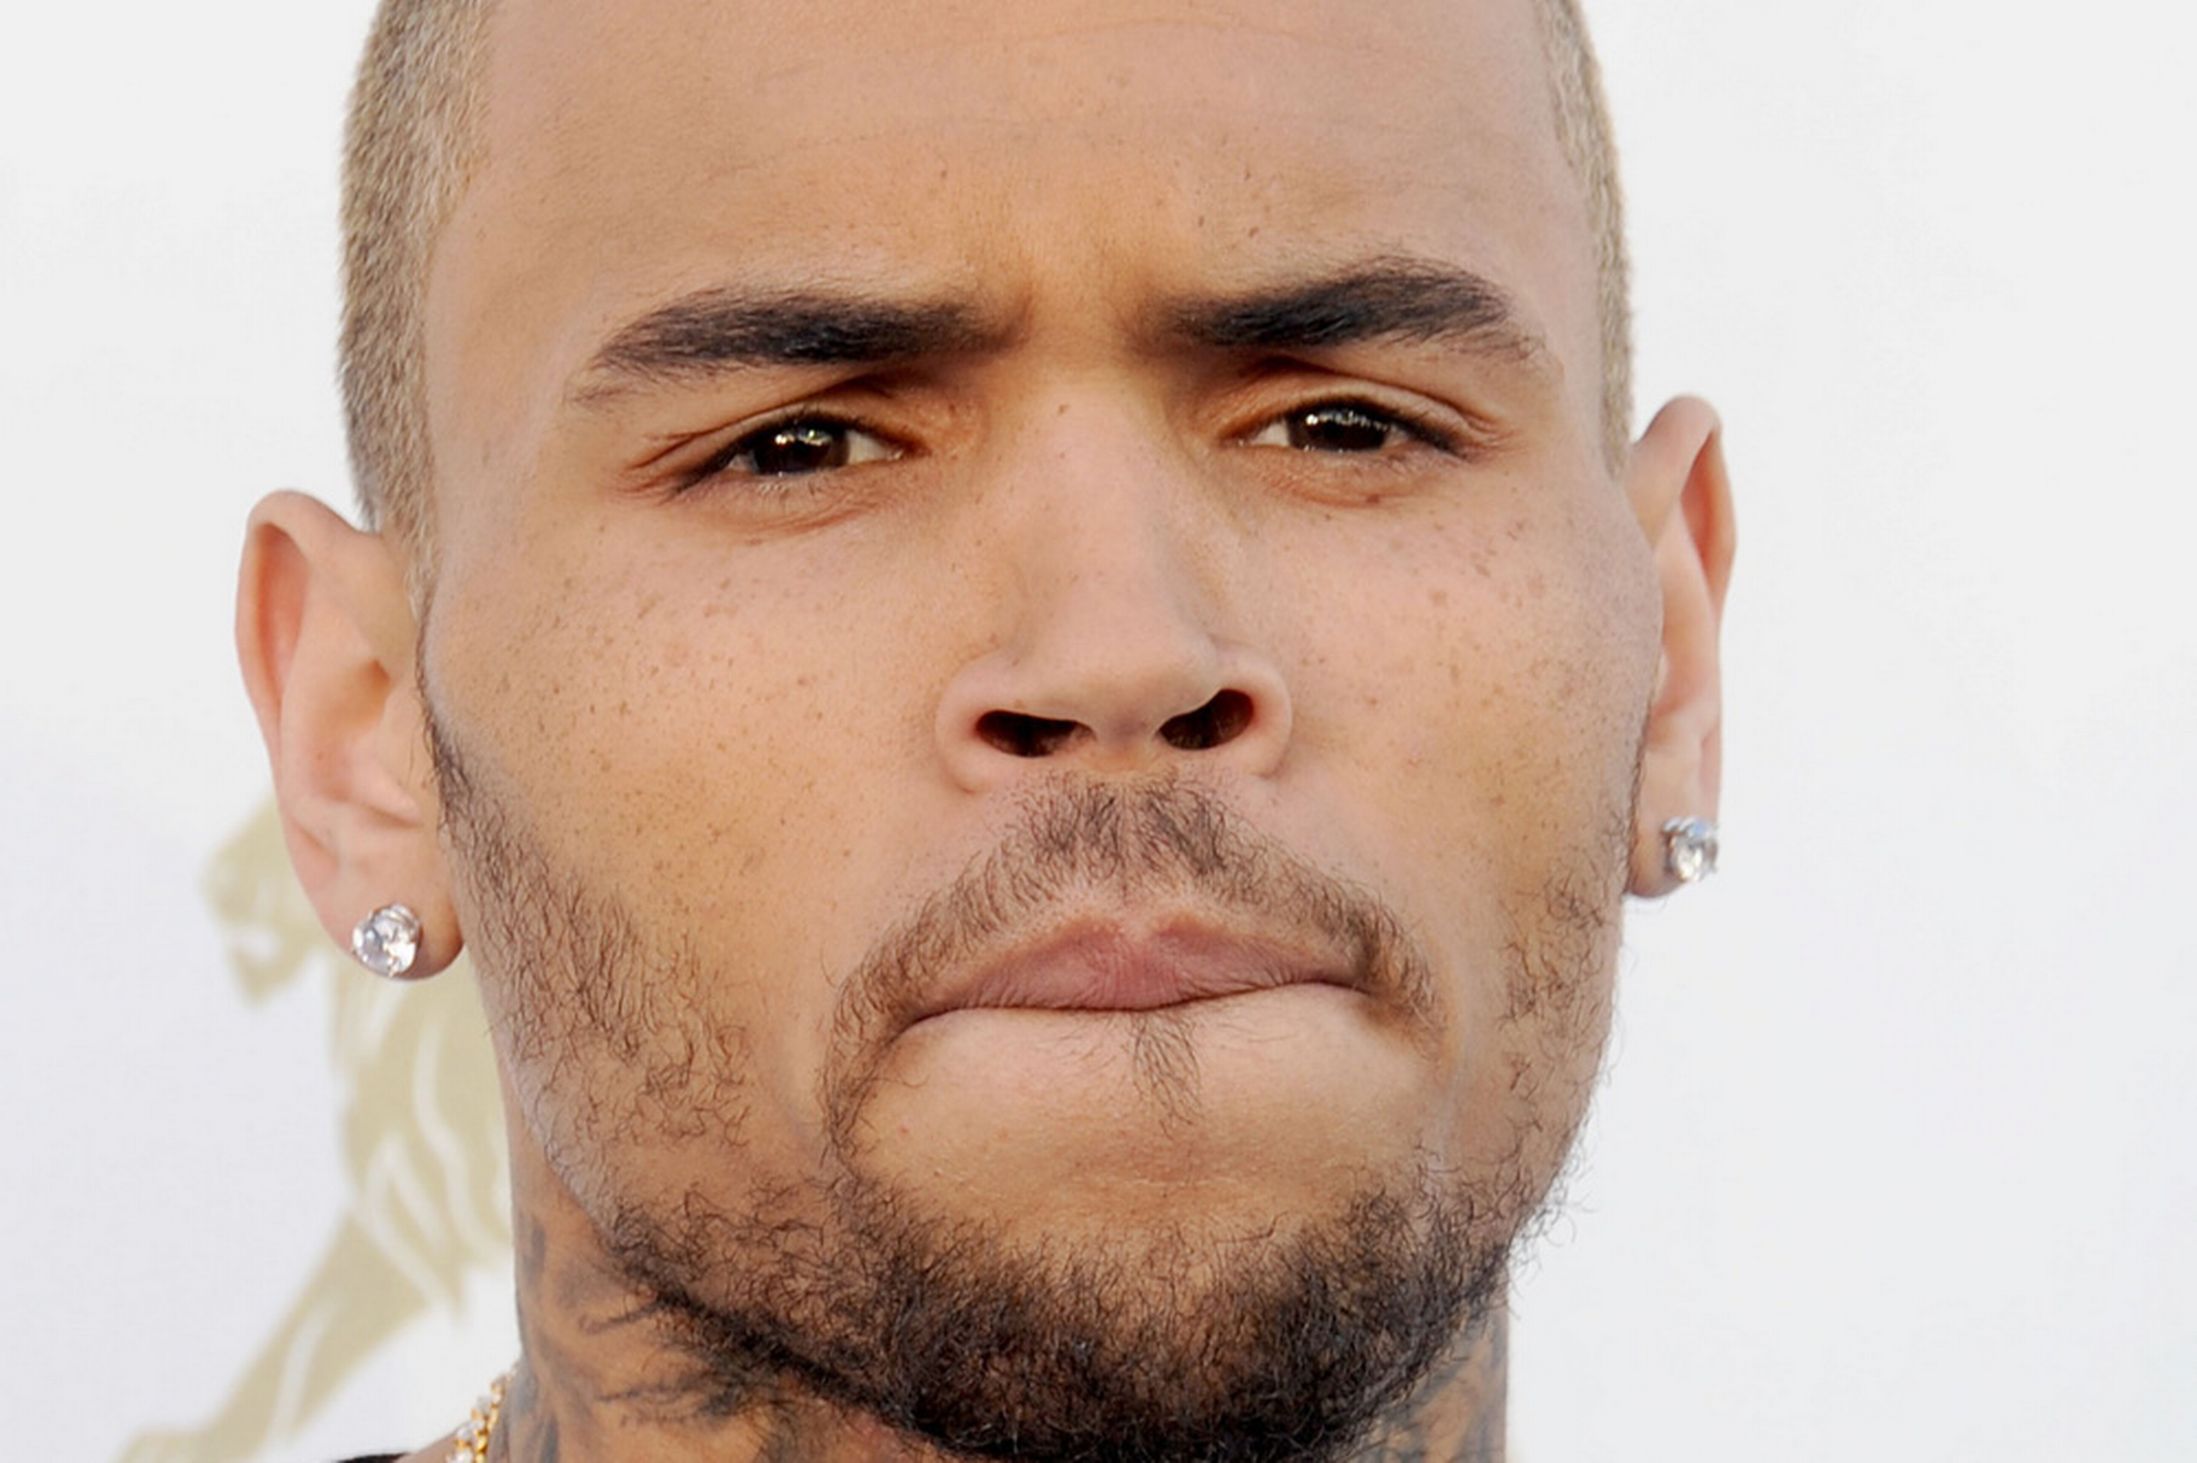 Still Lawless Chris Brown Arrested On Felony Assault Charges